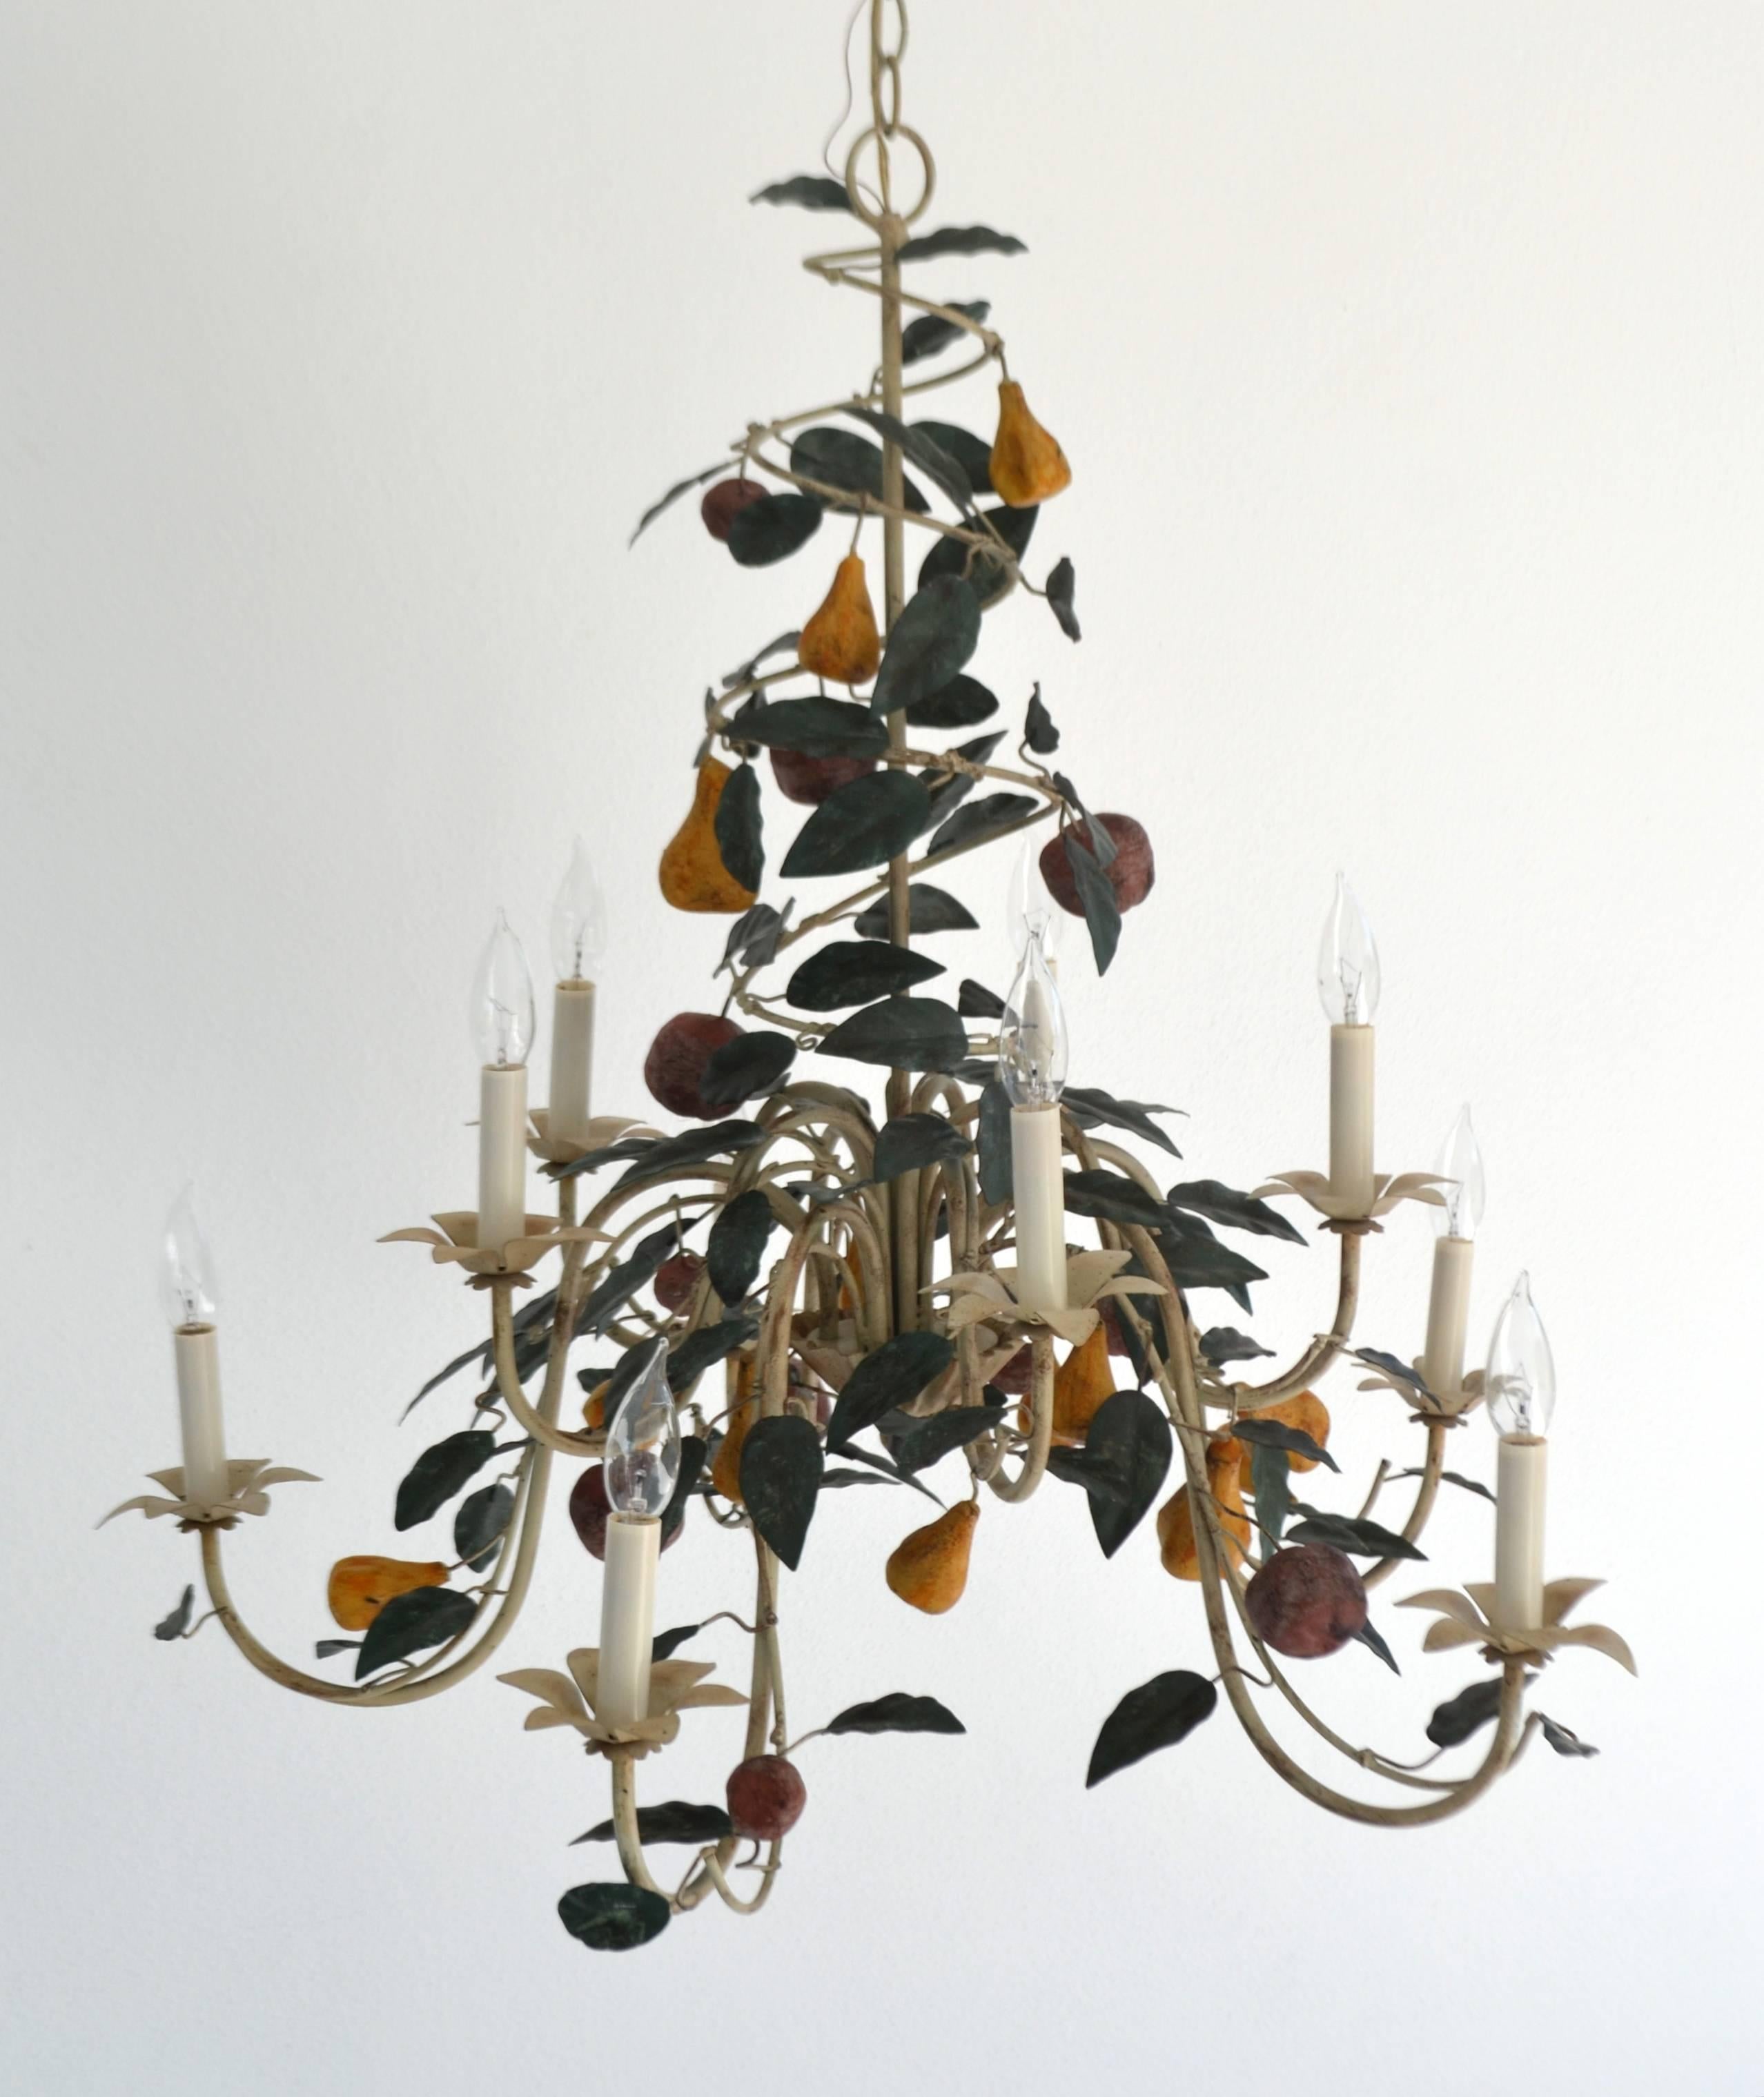 Striking Hollywood Regency tole ten-arm chandelier, circa 1960s. This stunning Italian custom-made chandelier is designed of painted tole foliage and fruit and accented with tole painted shades.
Measurements: 
Form: 32